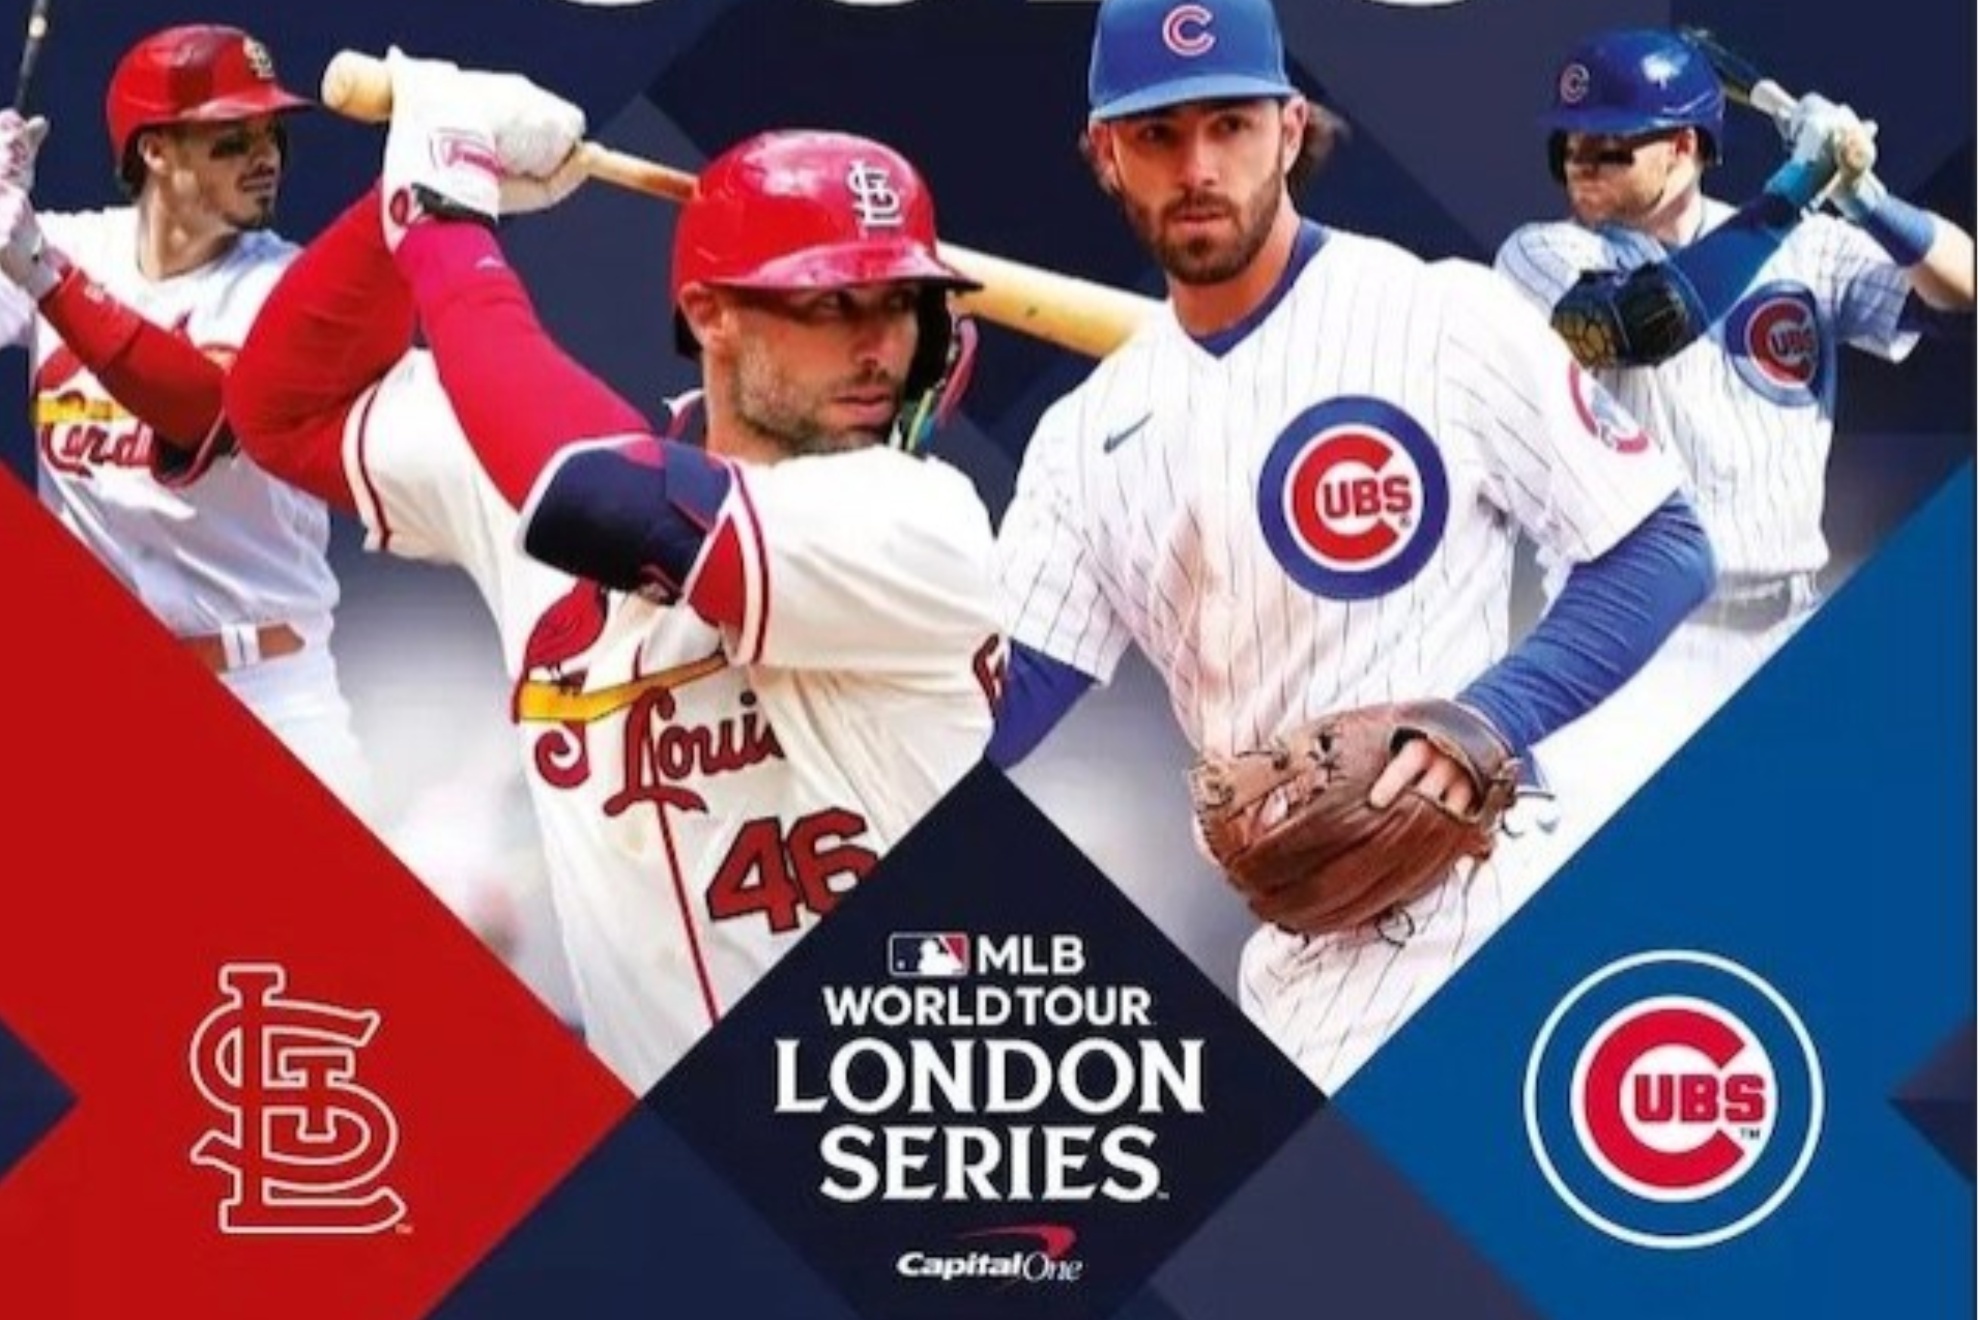 Cards and Cubs will face each other in London this weekend.